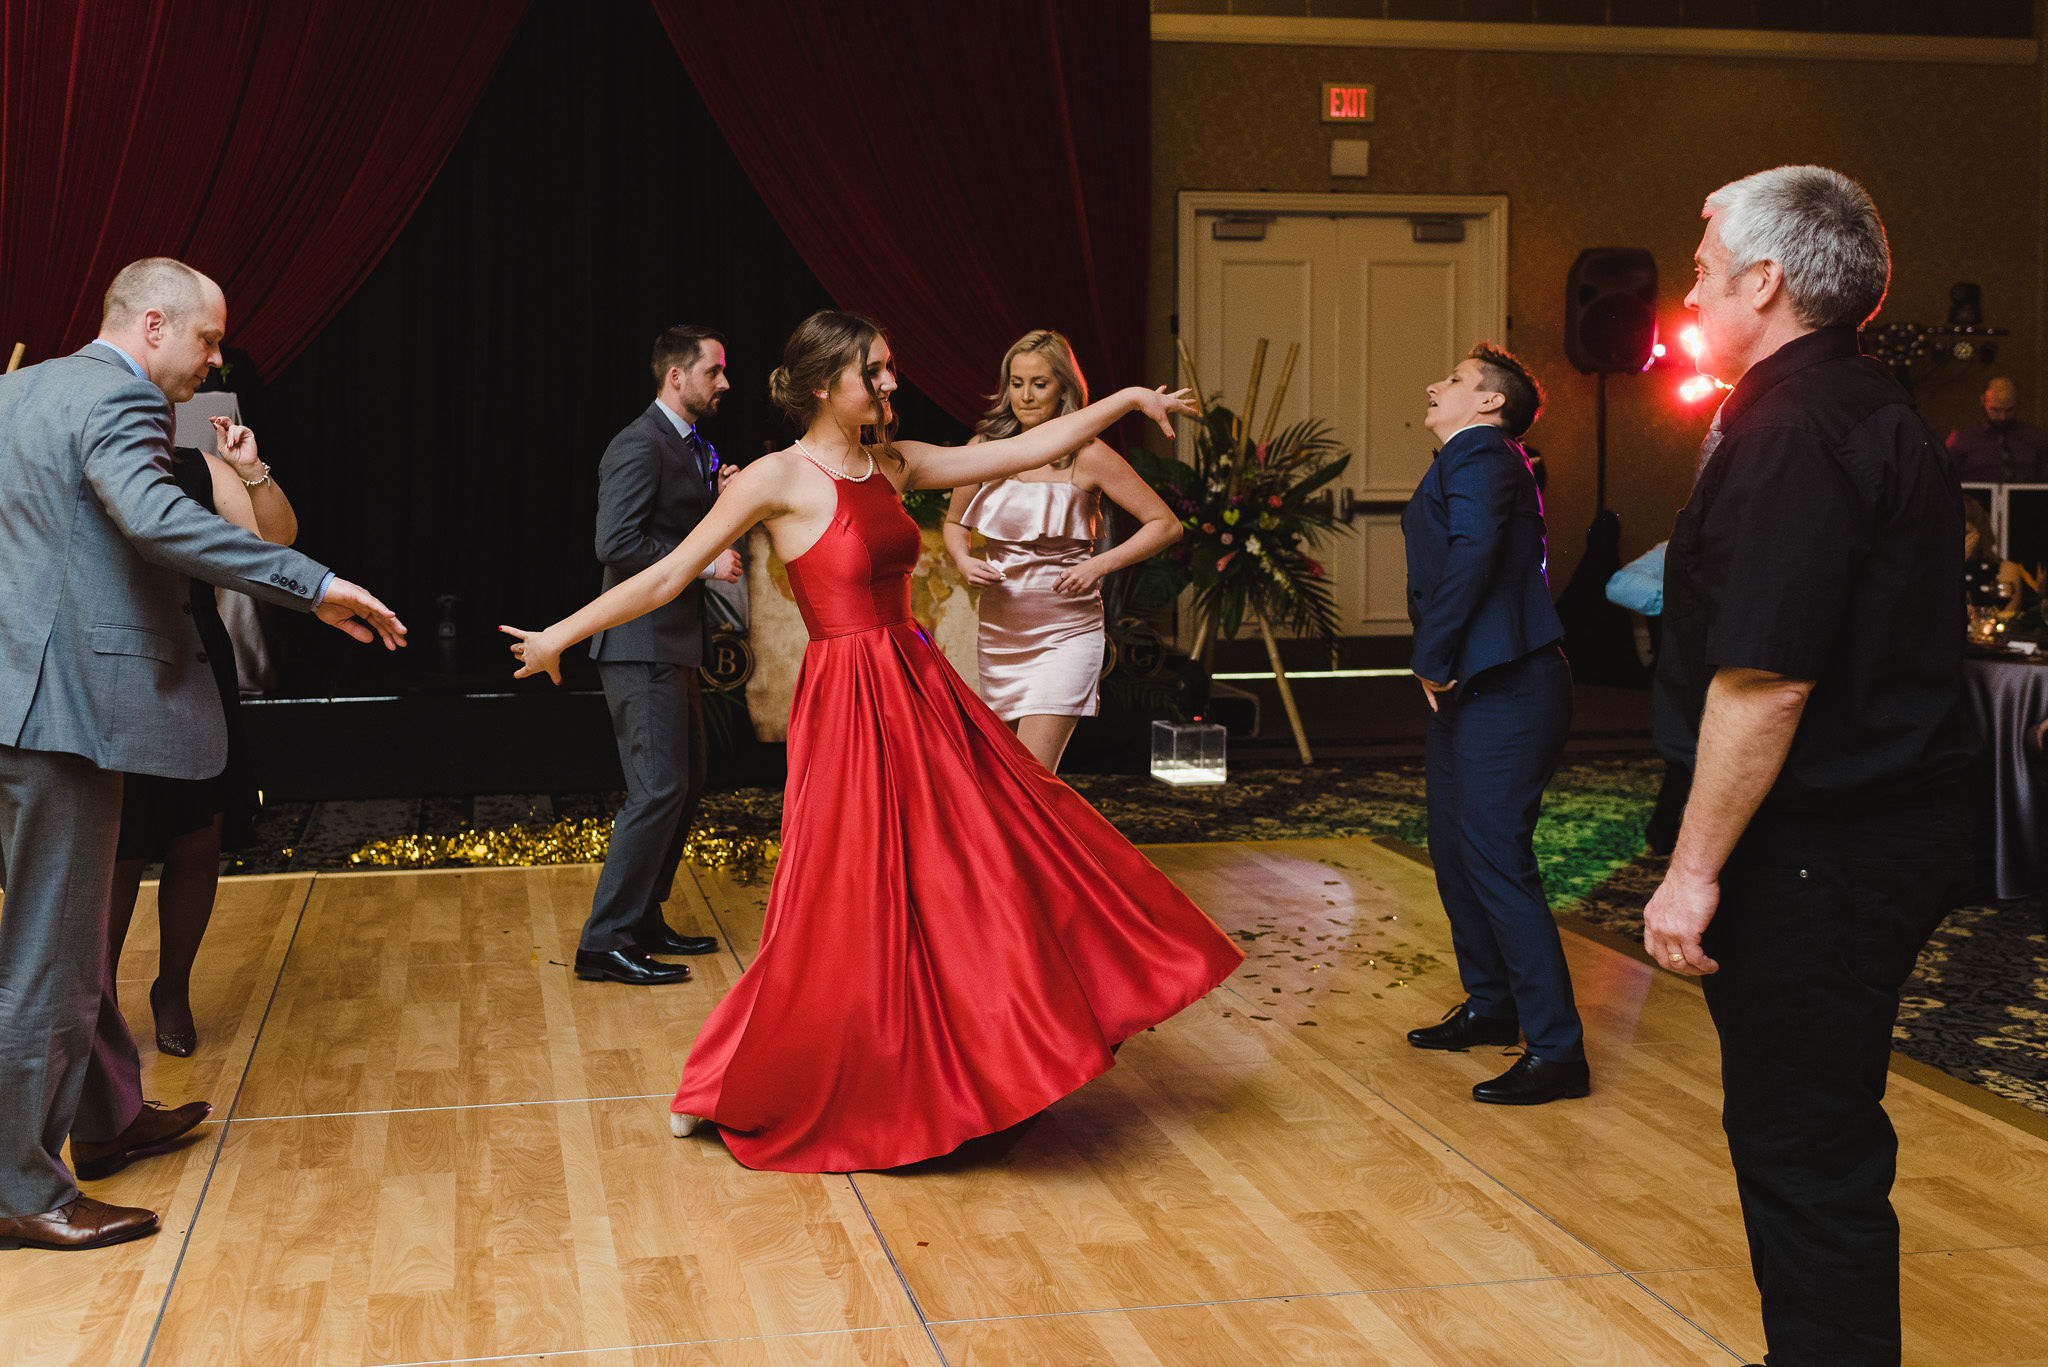 wedding guests dancing and a girl in a red dress twirling during a fun wedding reception at the Hilton Fallsview in Niagara Falls